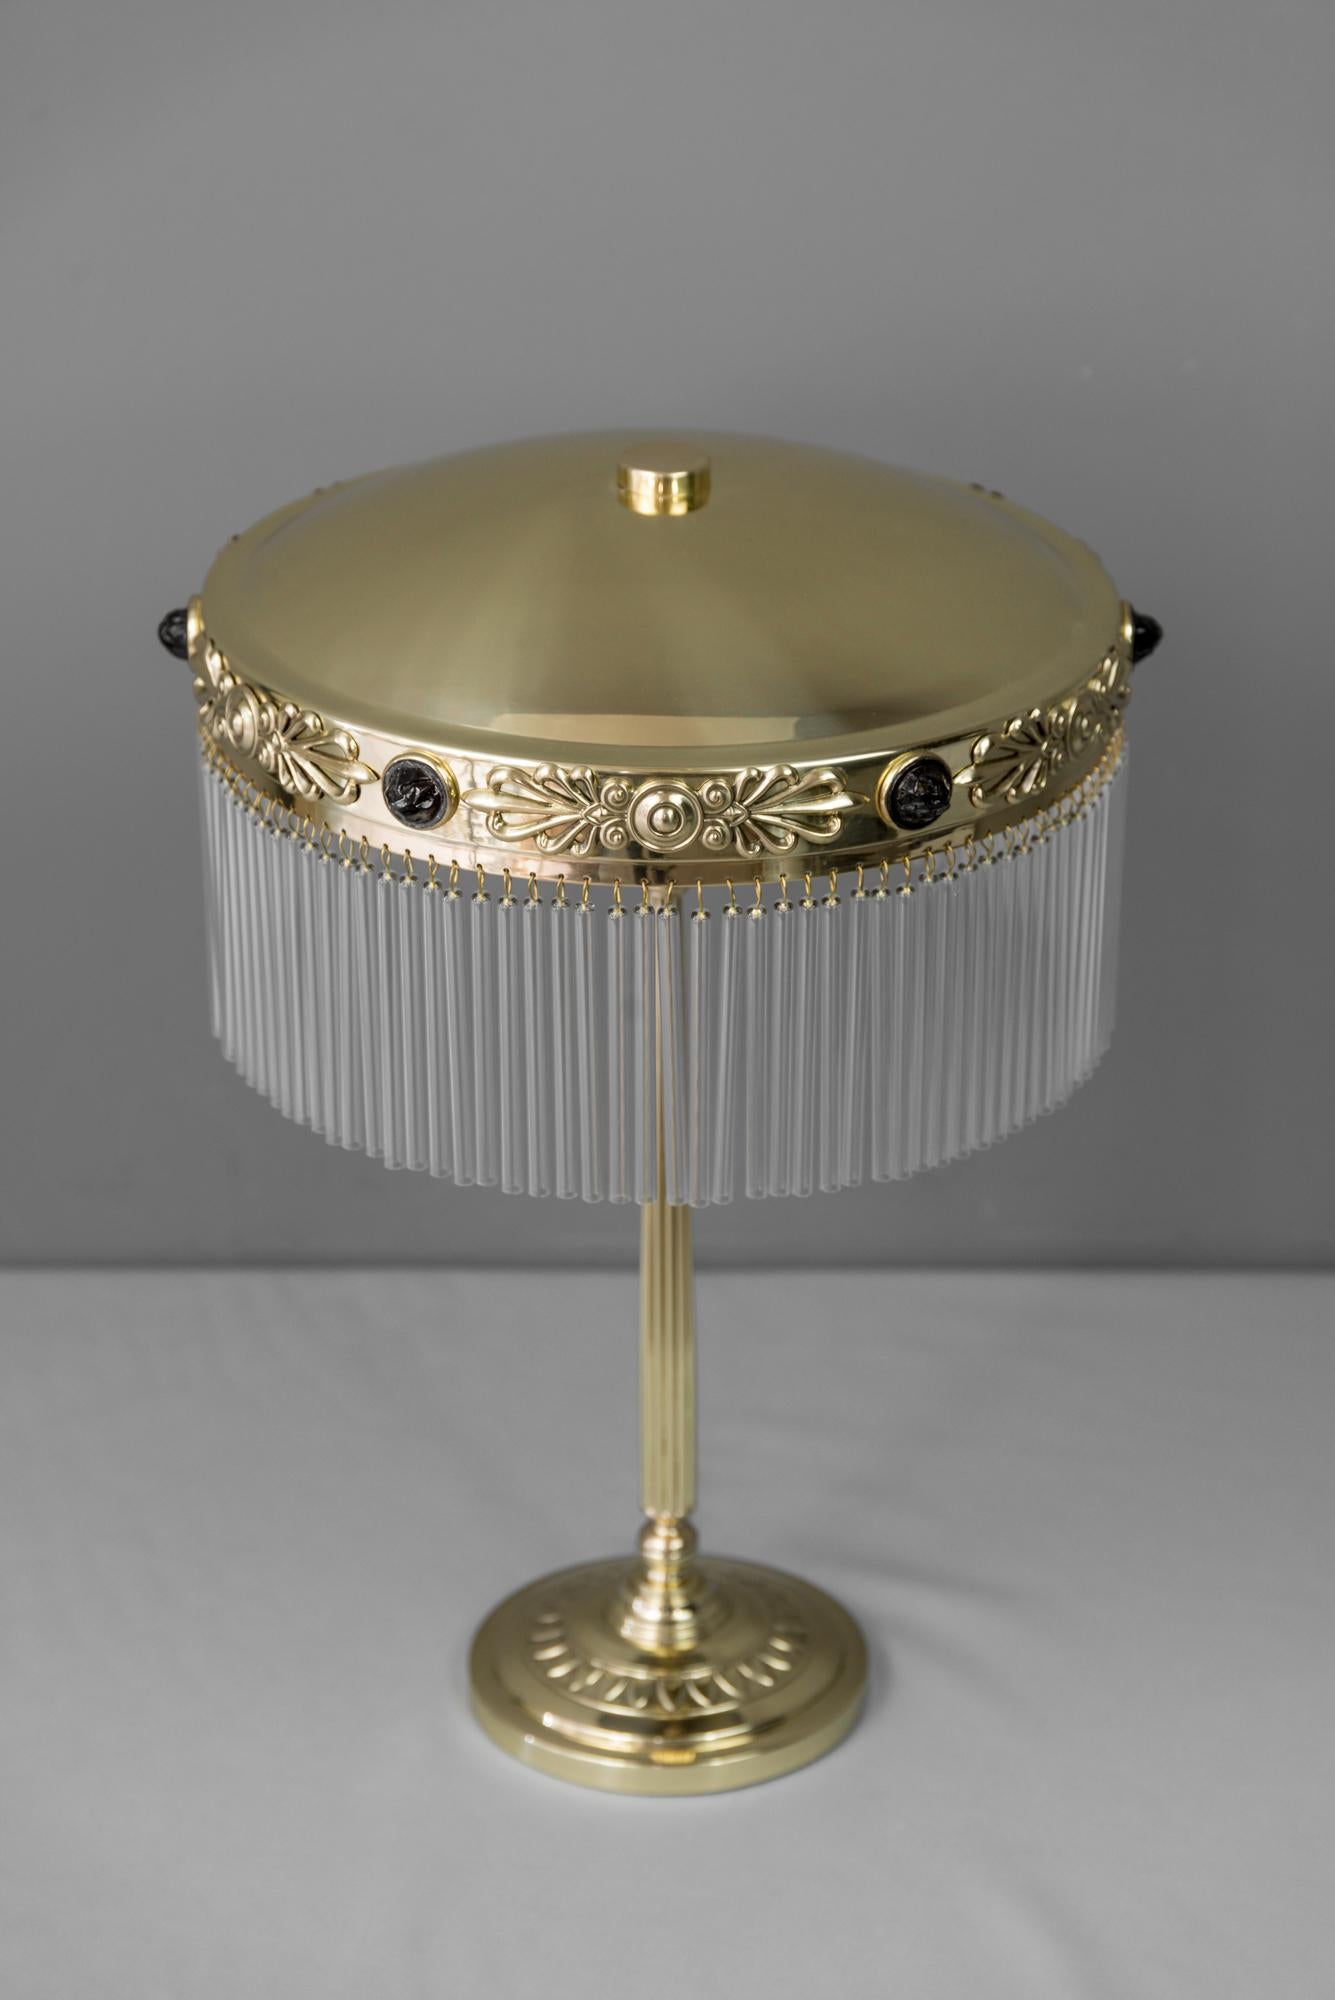 Austrian Jugendstil Table Lamp with Red Opaline Stones, circa 1908